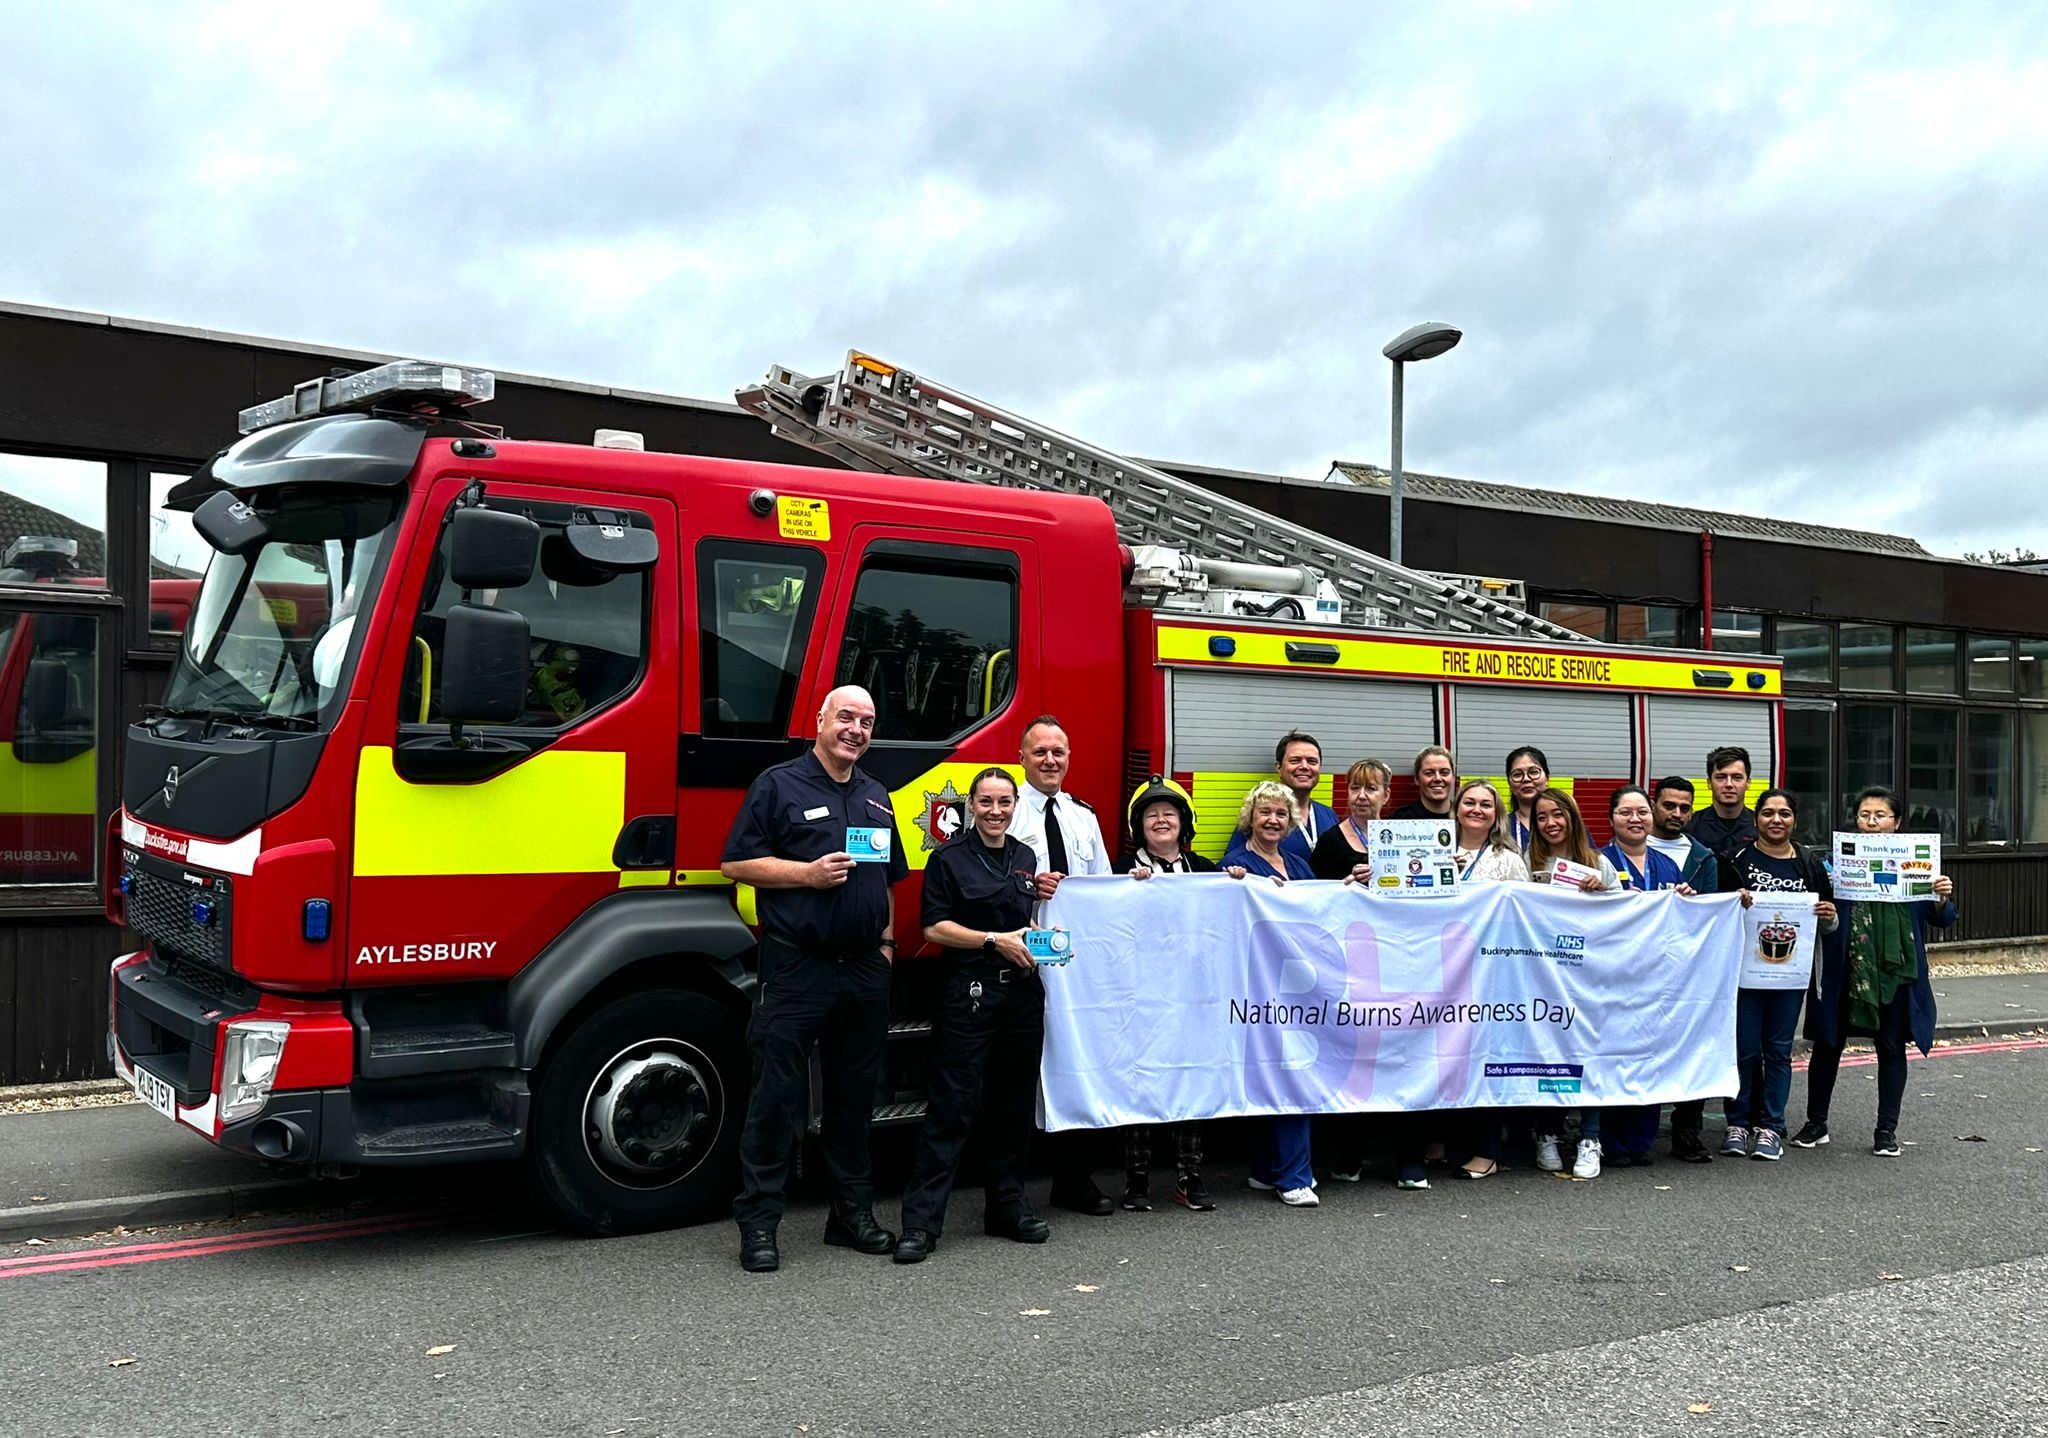 The Burns team holding a National Burns Awareness Day banner in front of a fire truck with some fire fighters.